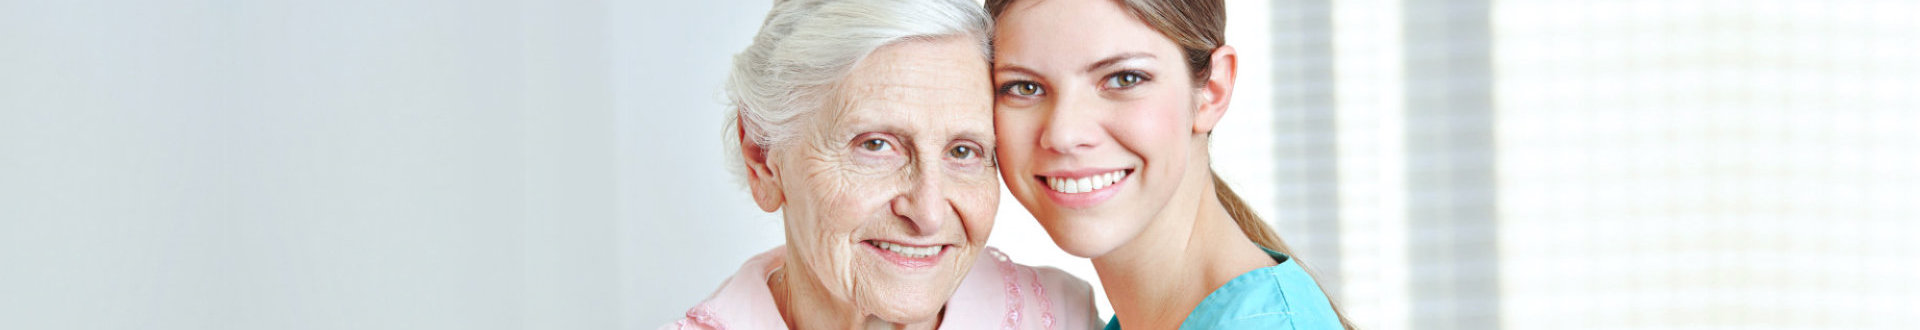 senior woman smiling together with caregiver